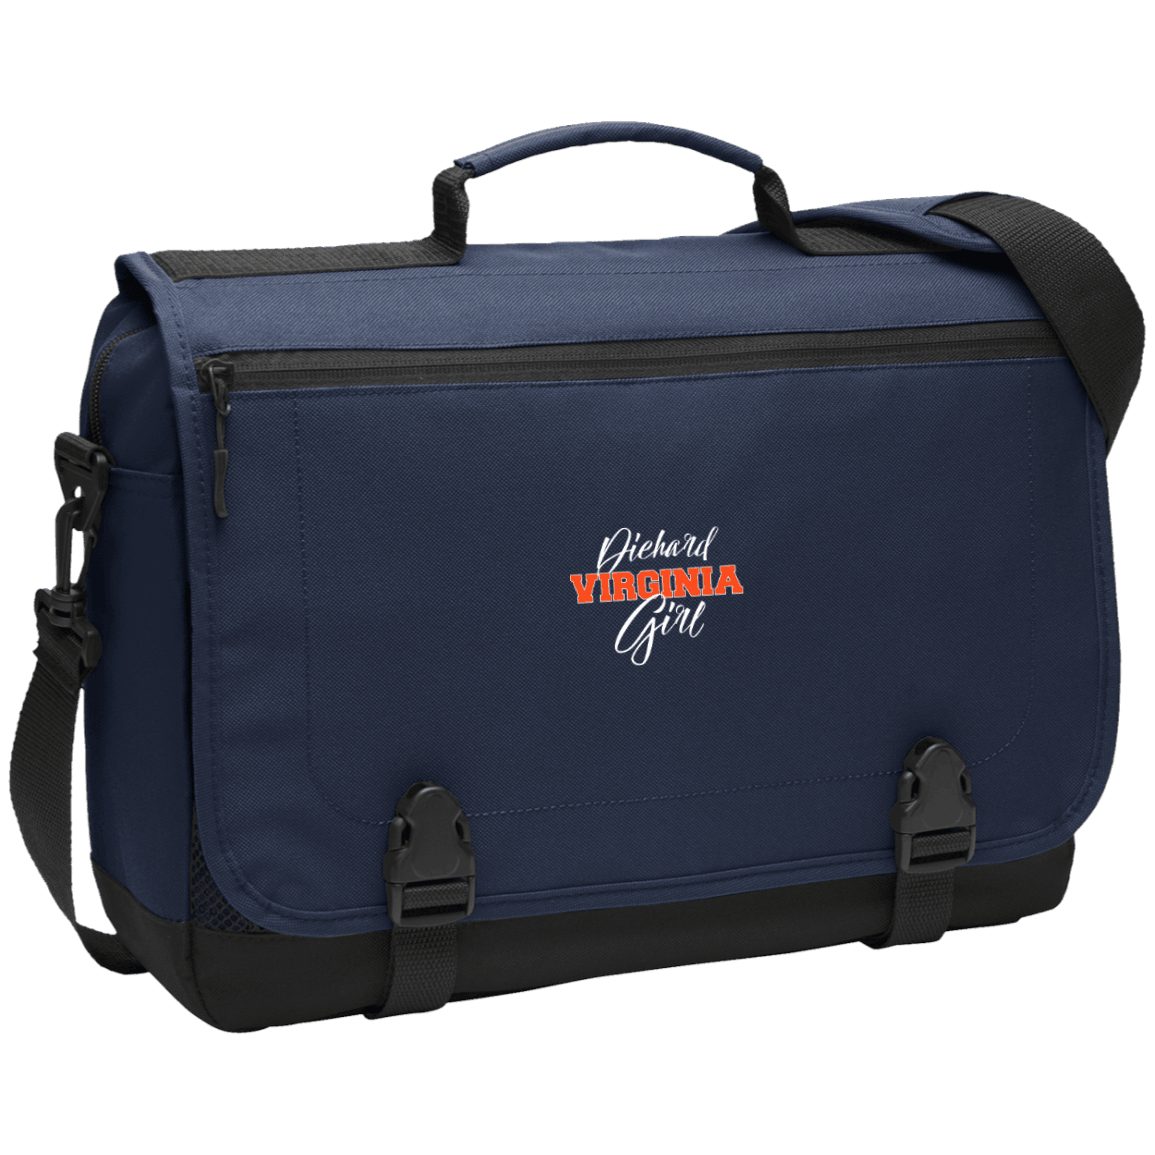 Designs by MyUtopia Shout Out:Diehard Virginia Girl Embroidered Port Authority Messenger Briefcase - Navy Blue,Navy / One Size,Bags